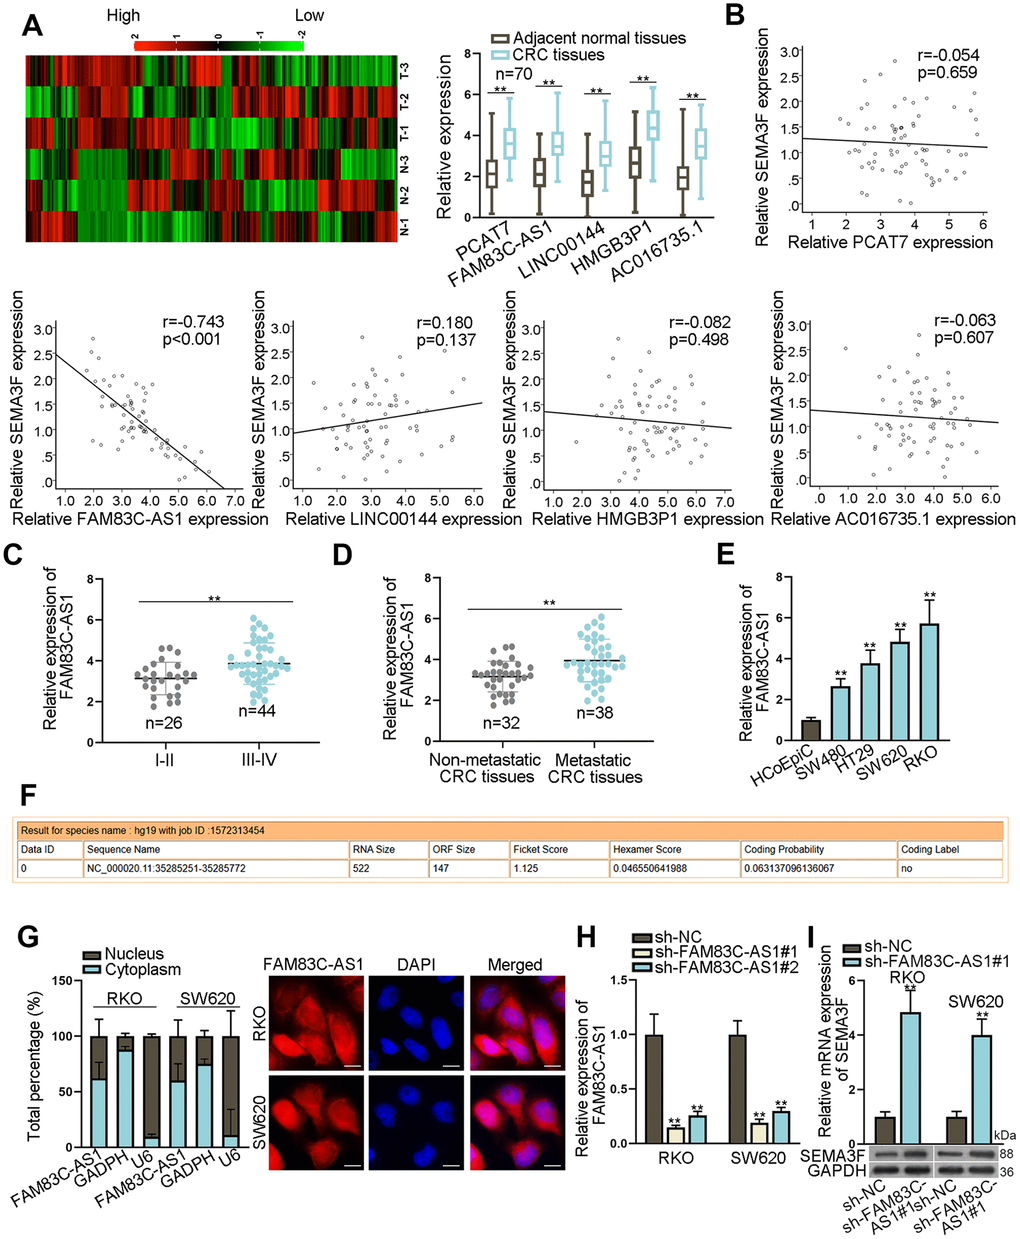 Opposite effects of FAM83C-AS1 and SEMA3F in CRCs. (A) The expression of 242 lncRNAs in CRC tissues and corresponding non-tumor tissues was detected using microarray analysis, and the expression of PCAT7, FAM83C-AS1, LINC00144, HMGB3P1 and AC016735.1 was detected in CRC tissues and adjacent non-tumor tissues using RT-qPCR. (B) The correlation between SEMA3F and lncRNAs (PCAT7, FAM83C-AS1, LINC00144, HMGB3P1 and AC016735.1) was analyzed using Spearman’s correlation analysis. (C) FAM83C-AS1 expression was detected using RT-qPCR in early and advanced stages of CRC patients. (D) FAM83C-AS1 expression in metastatic CRC tissues and non-metastatic CRC tissues was detected using RT-qPCR. (E) FAM83C-AS1 expression in CRC cell lines and normal human colonic epithelial cell line (HCoEpiC) was examined by RT-qPCR. (F) The coding potential of FAM83C-AS1 was obtained from CPAT. (G) The subcellular localization of FAM83C-AS1 was determined by subcellular fractionation and FISH assays. (H) The efficiency of FAM83C-AS1 was evaluated using RT-qPCR. (I) SEMA3F expression in RKO and SW620 cells transfected with sh-FAM83C-AS1#1 or sh-NC was detected using RT-qPCR and western blot analyses. **P ***P 